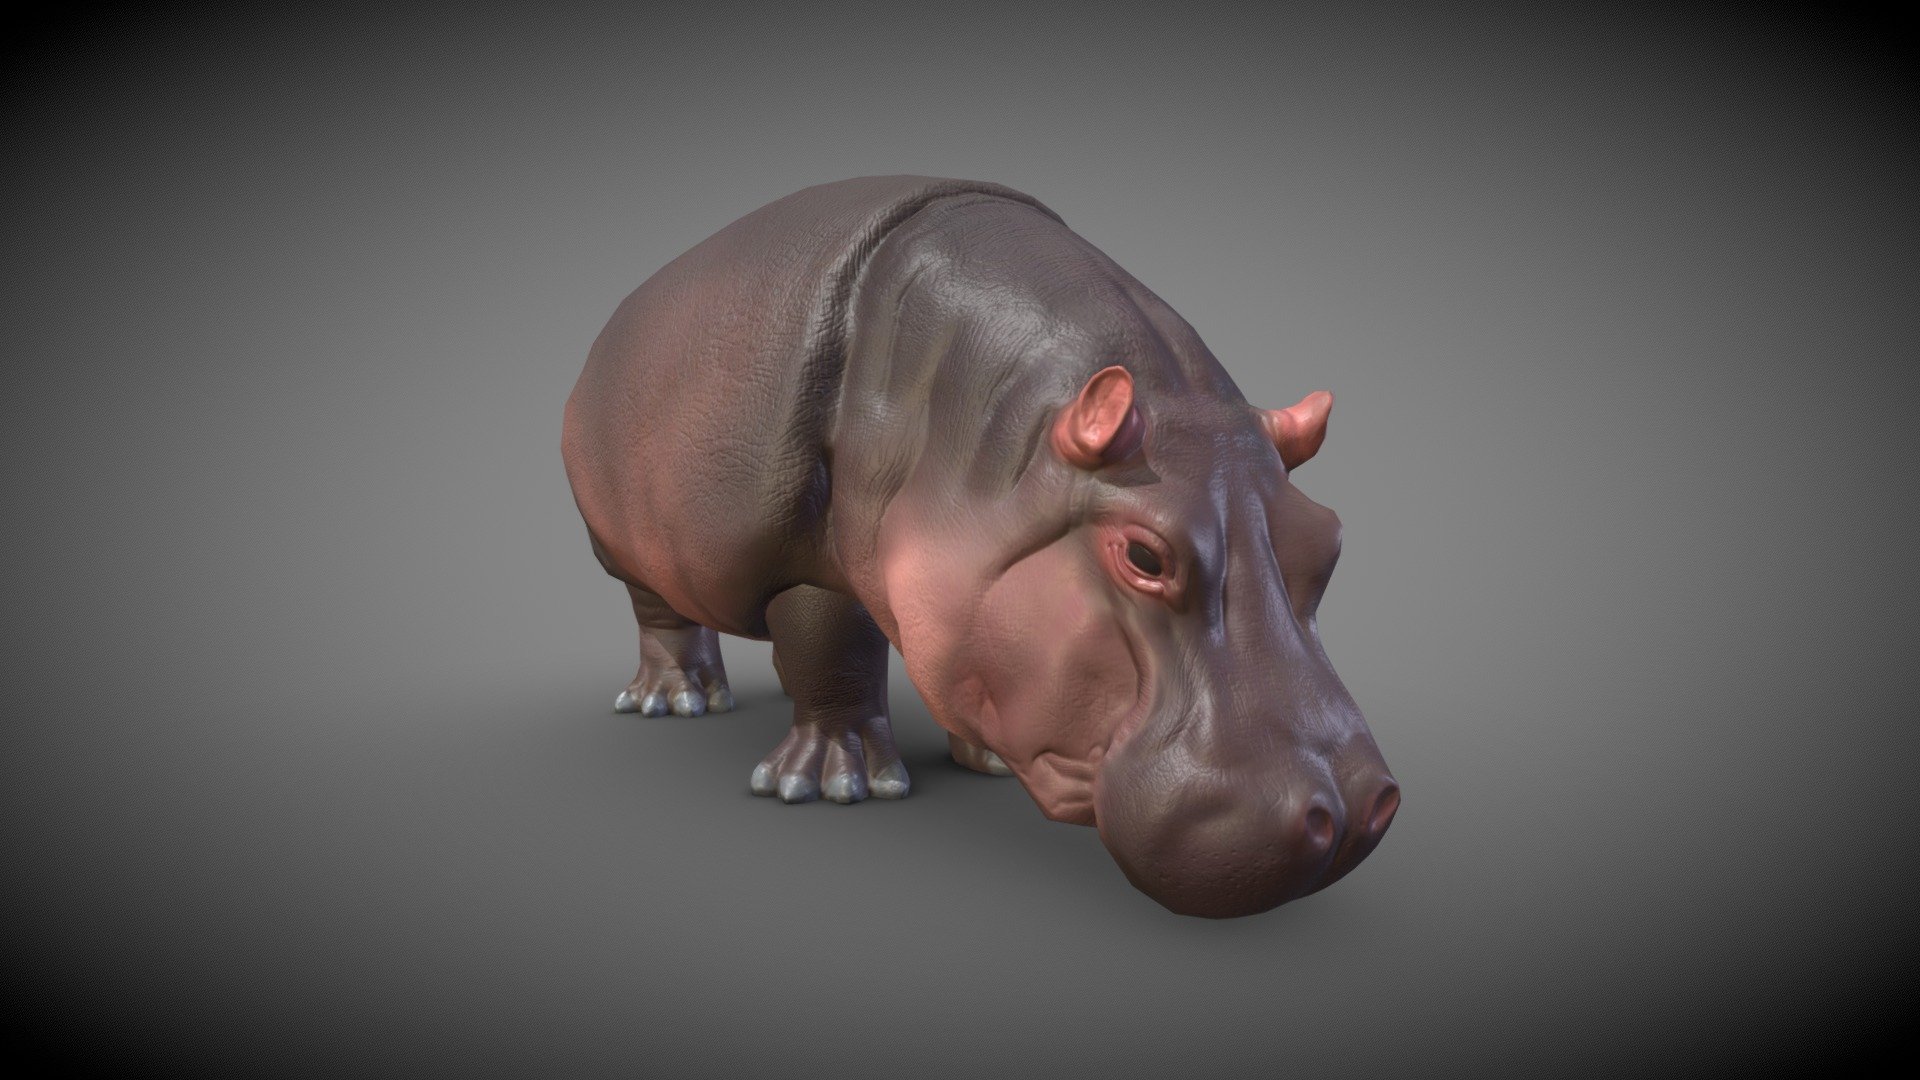 Realistic low-poly (4876 tris) hippopotamus model.

Ready for PBR: includes base color, normal, roughness, AO and curvature maps in .png format (2048x2048 px). Metallness wasn't needed in this case.

The model can be easily subdivided for smoother appearance if needed, without subdiv it consists of 4876 triangles.
Dimensions are: 1.45 x 3.5 x 1.8 m (57.1 x 137,8 x 70,9 inches).

The model is not rigged and not animated. The mouth can not be opened, also the tail is connected to the body for the most of its length, be aware of that.

Included are .obj and .fbx files, set of textures (separately and layered in .psd file), also there is a Blender file already set up with material and textures applied, so you can open it and render right away if you wish so. Also included is a preview render of the model 3d model